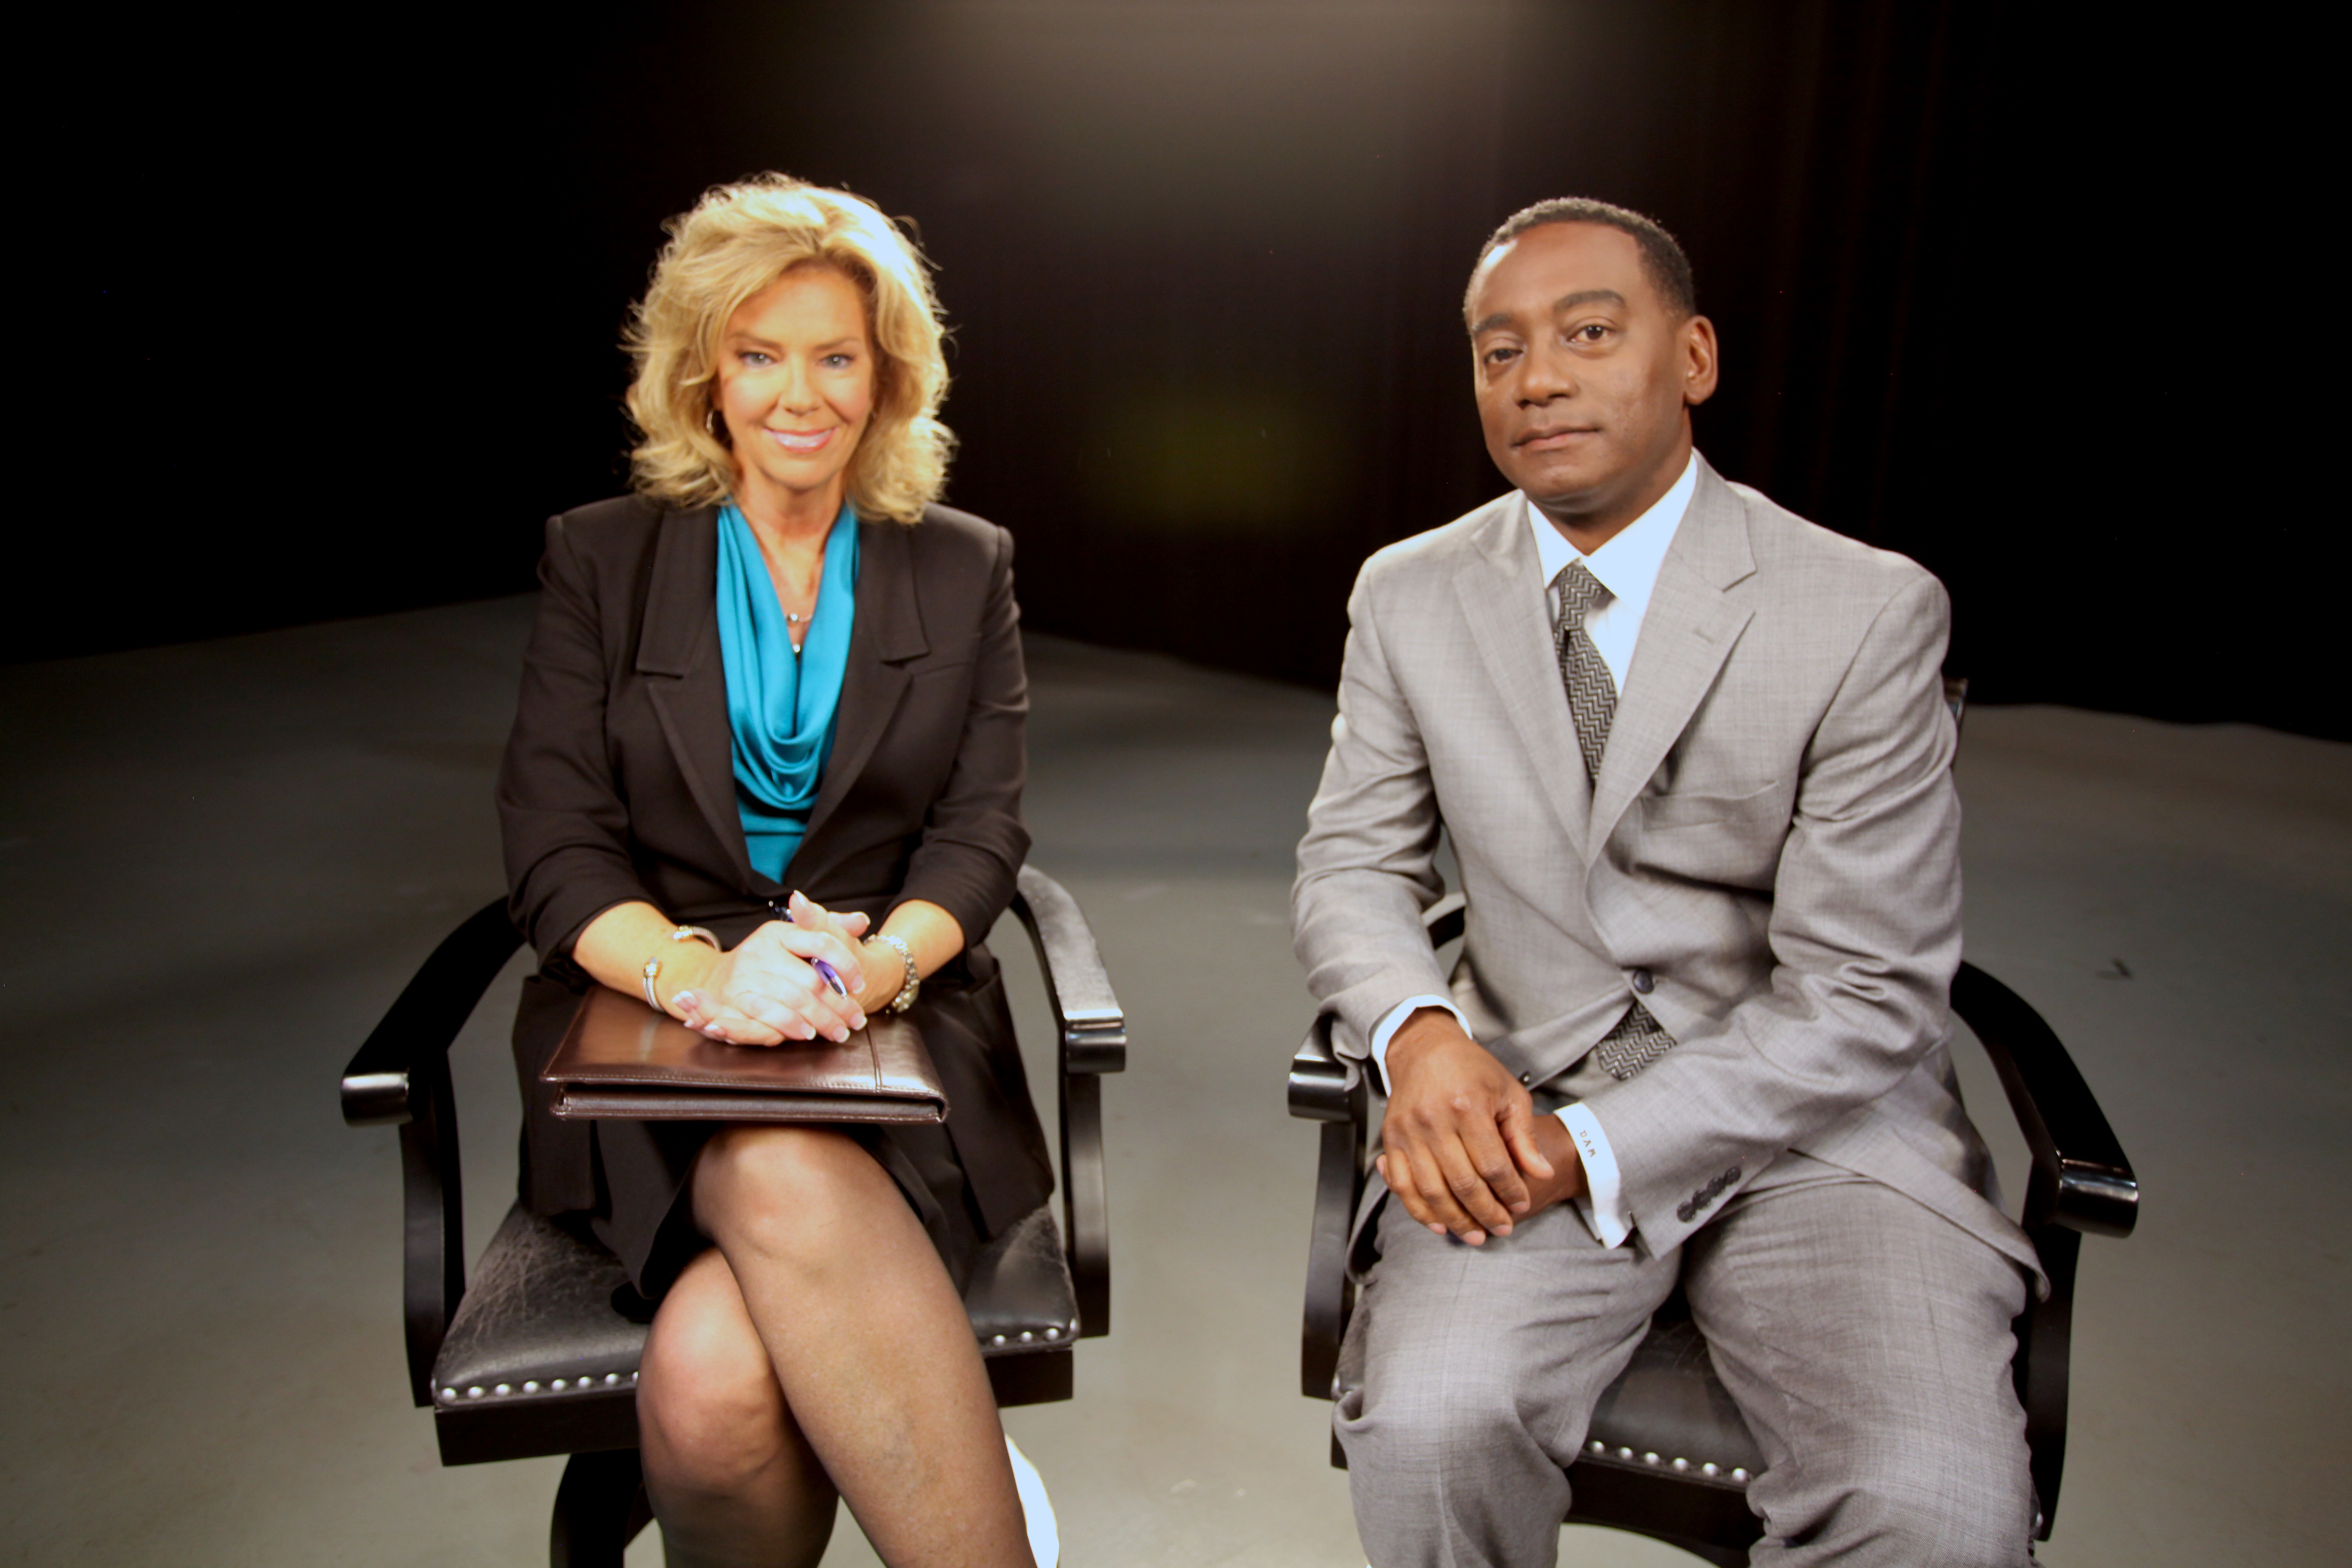 Derrick Miller poses for a photo at the WWJ-TV studio during a "Michigan Matters" exclusive interview. (credit: CBS 62)